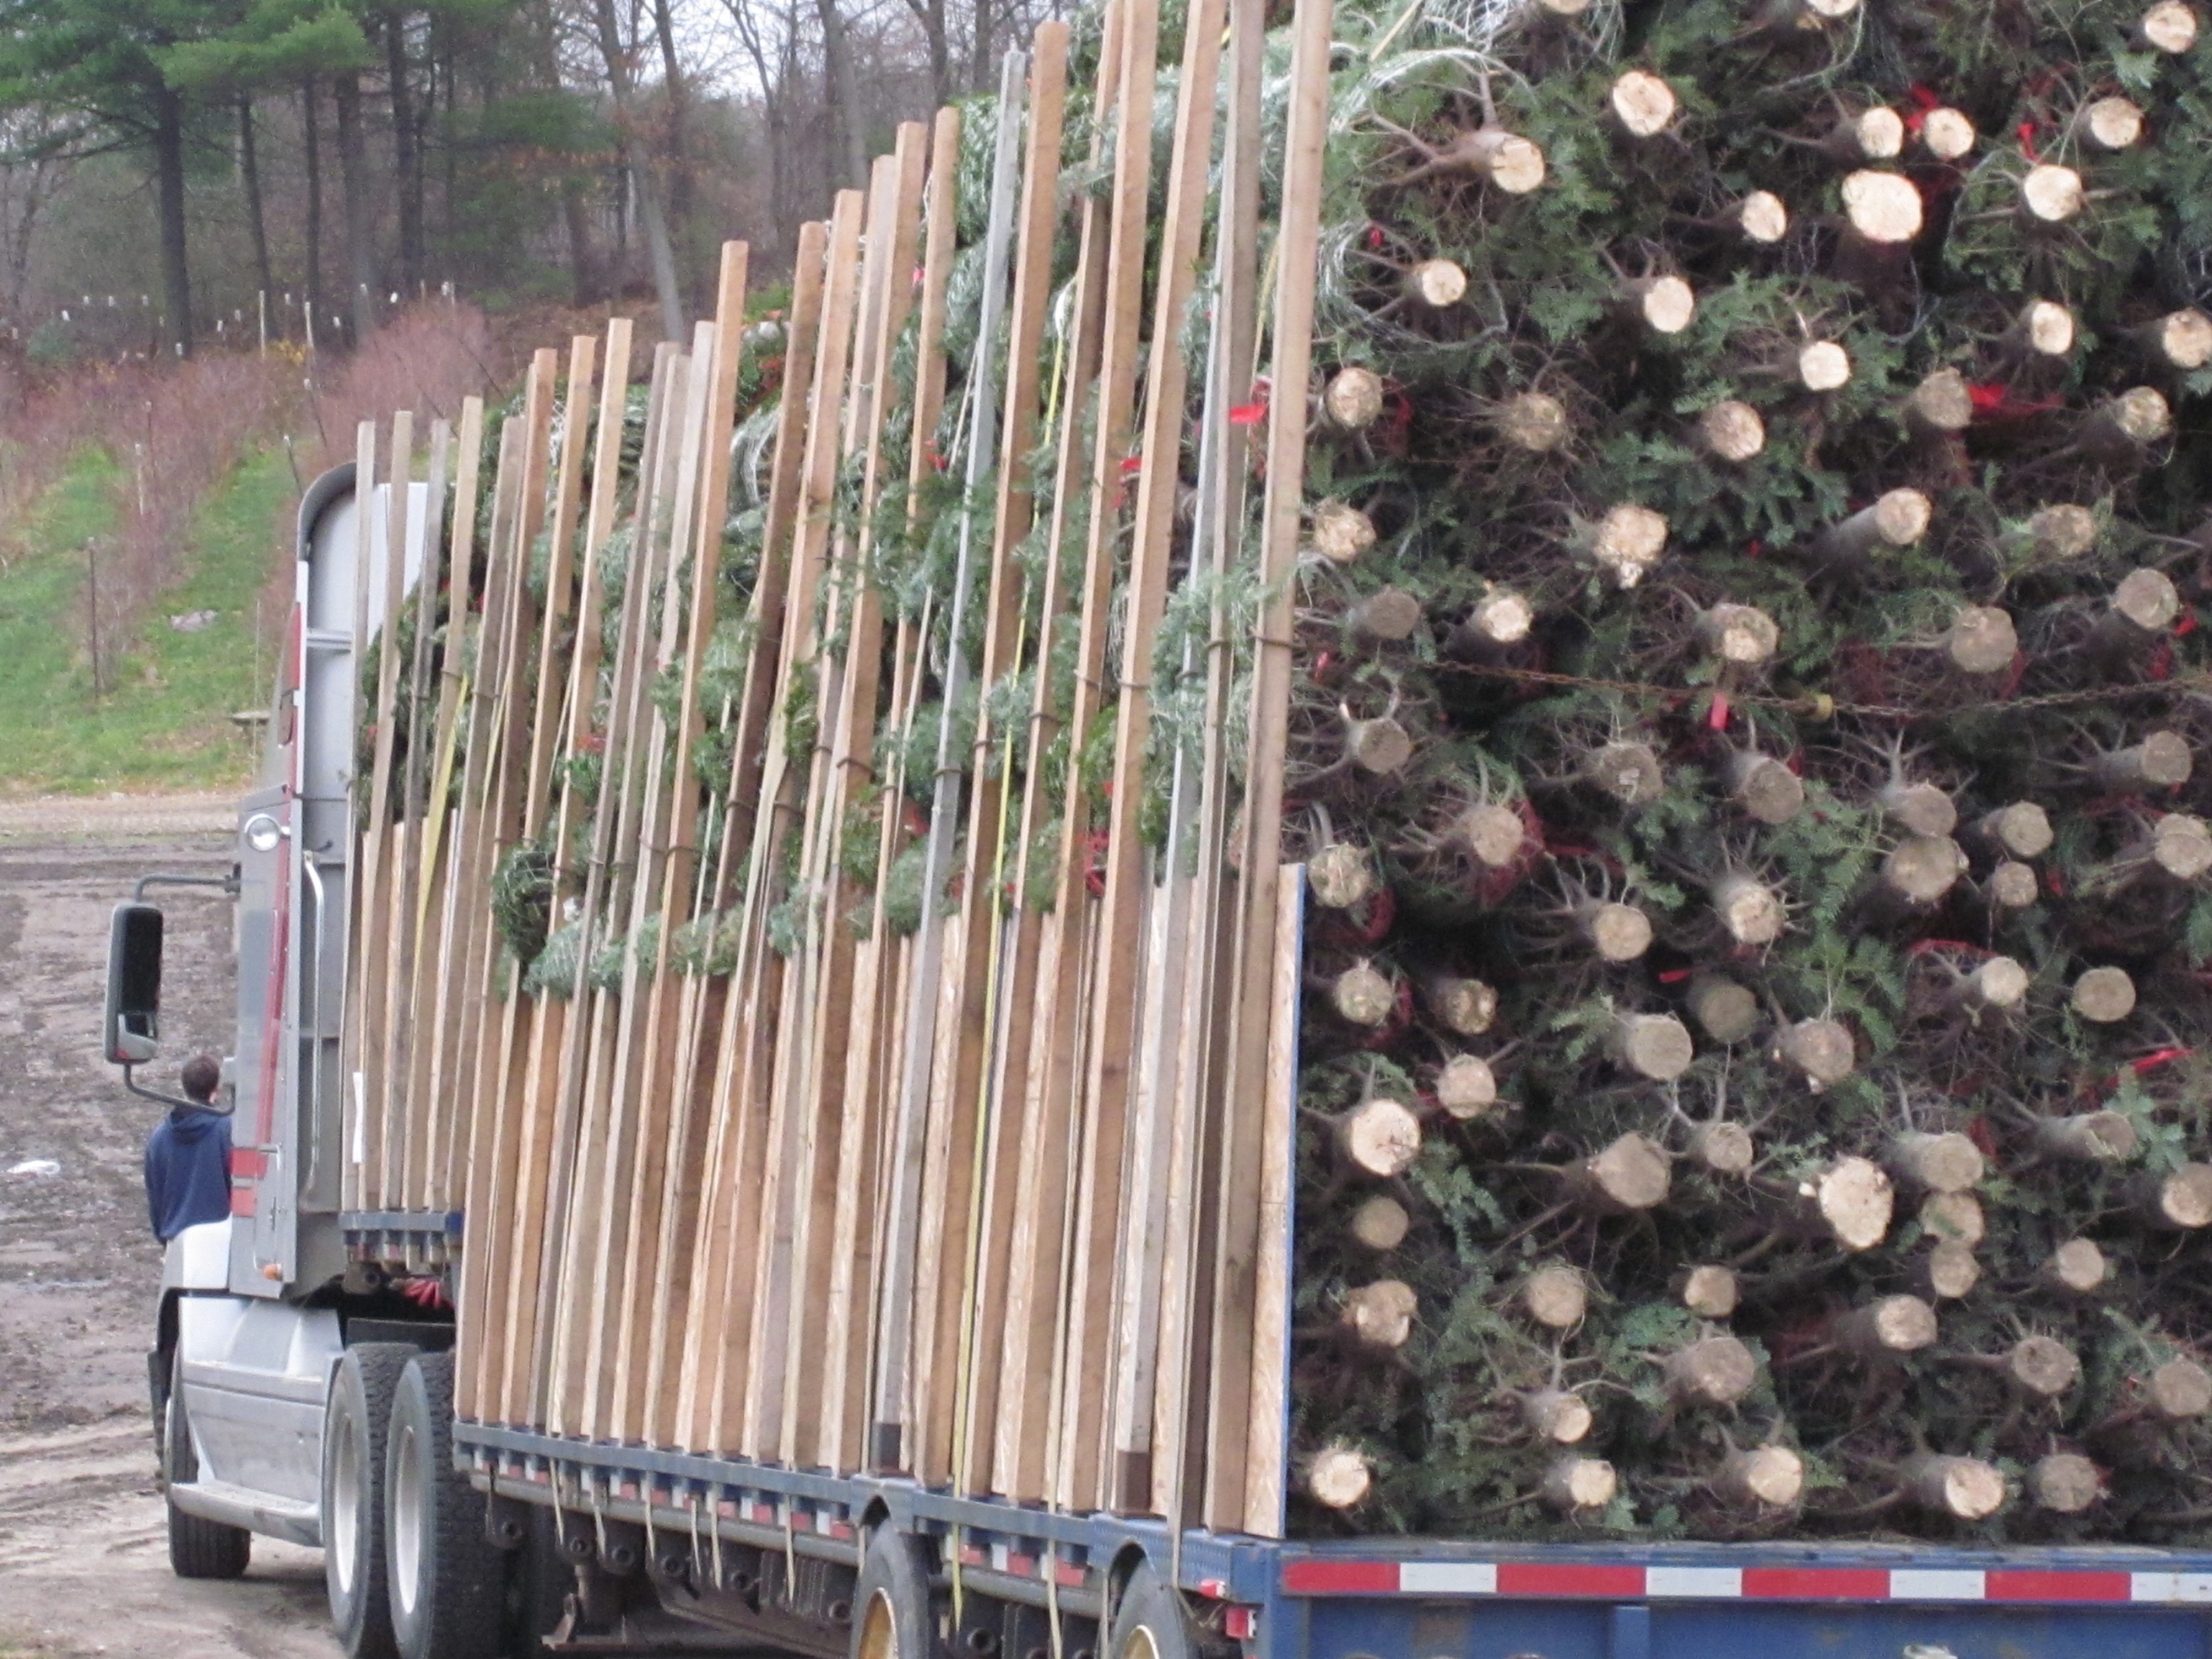 Truckload of cut christmas trees